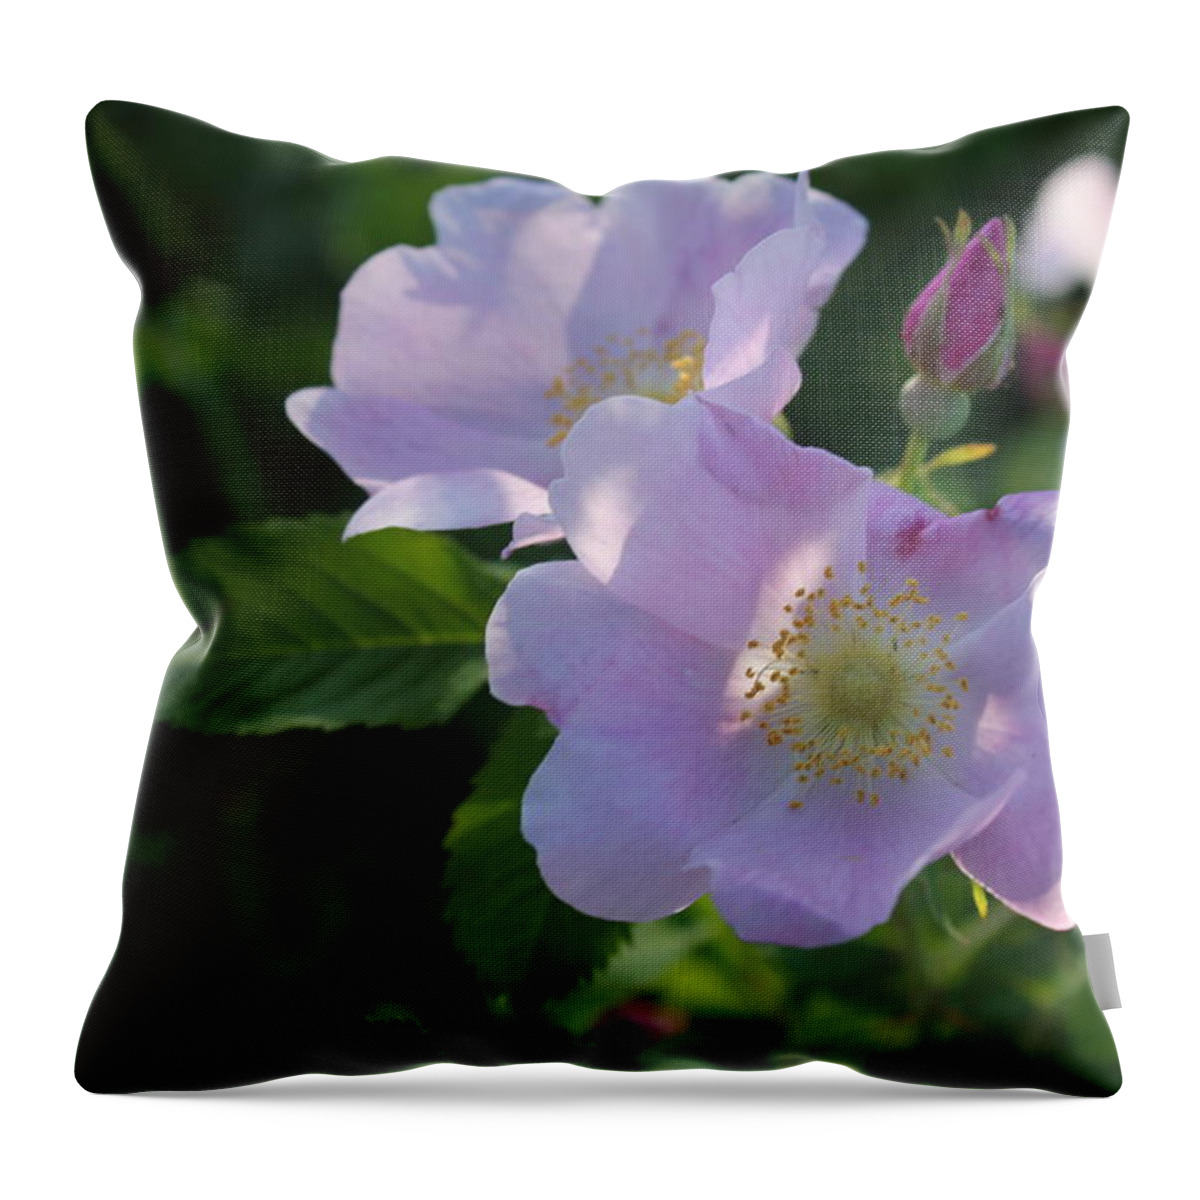 Wild Rose Throw Pillow featuring the photograph Wild Roses by Ruth Kamenev